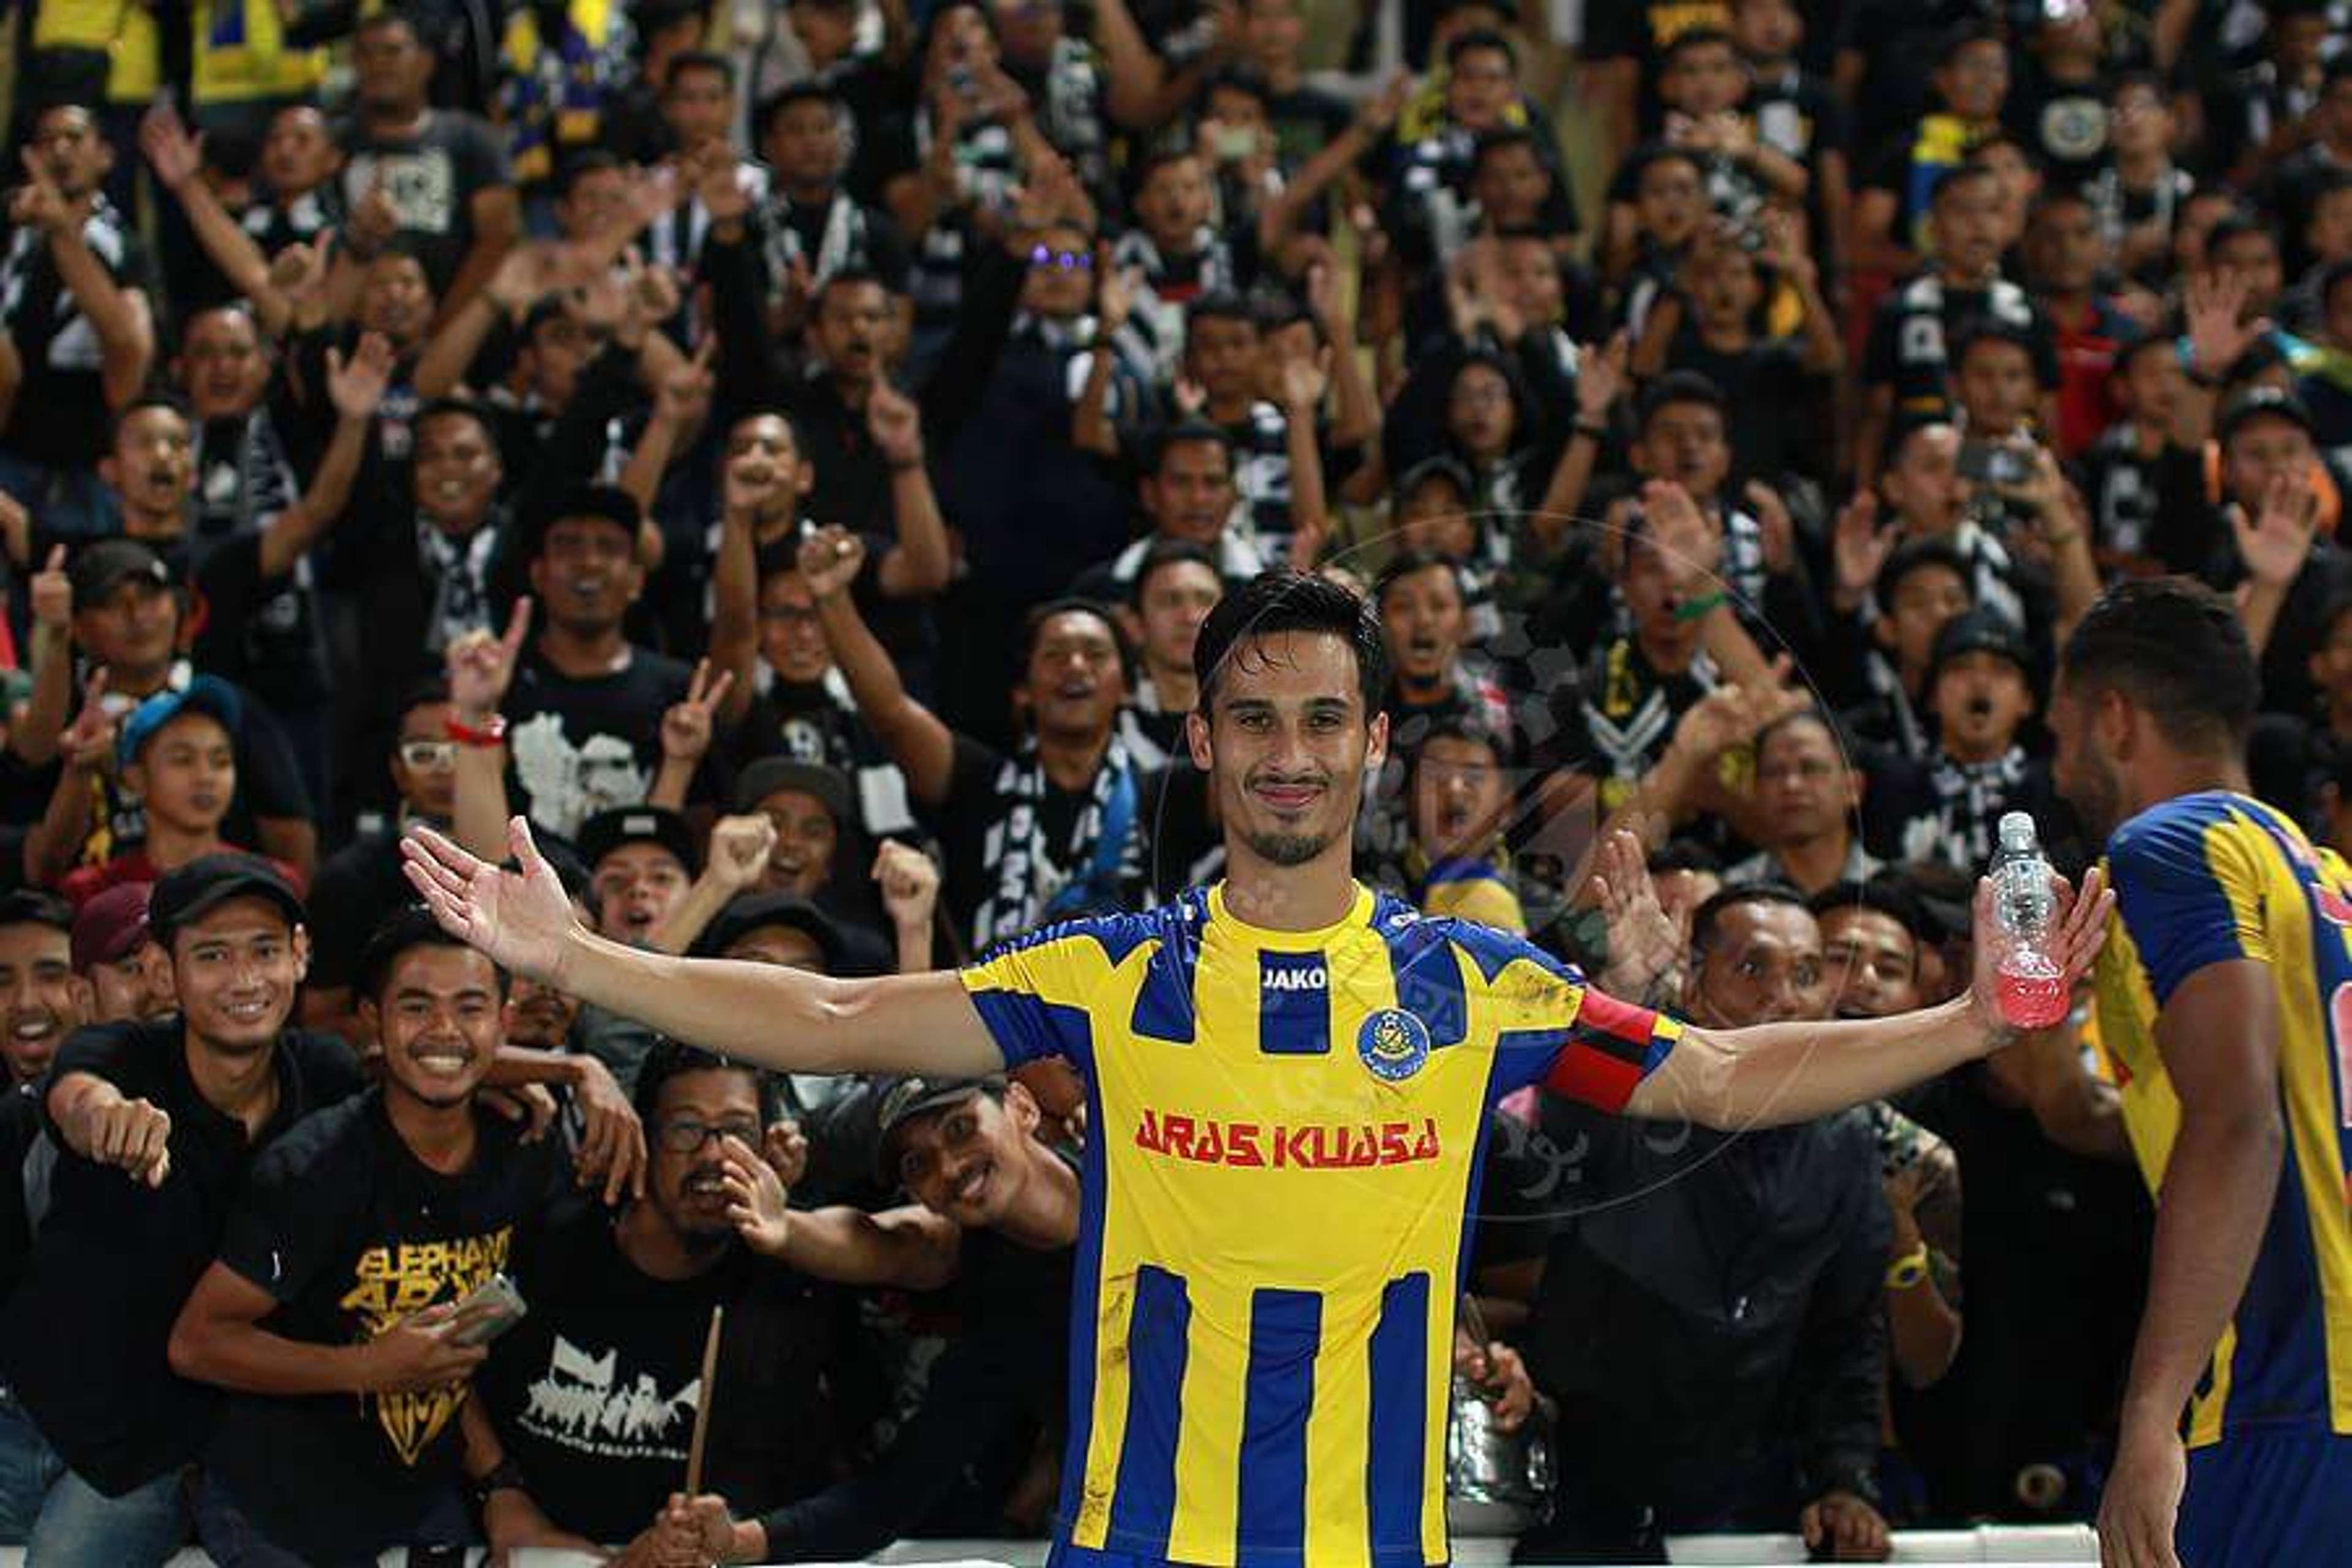 Pahang's Matthew Davies celebrating their win against T-Team with the fans 27/1/2017